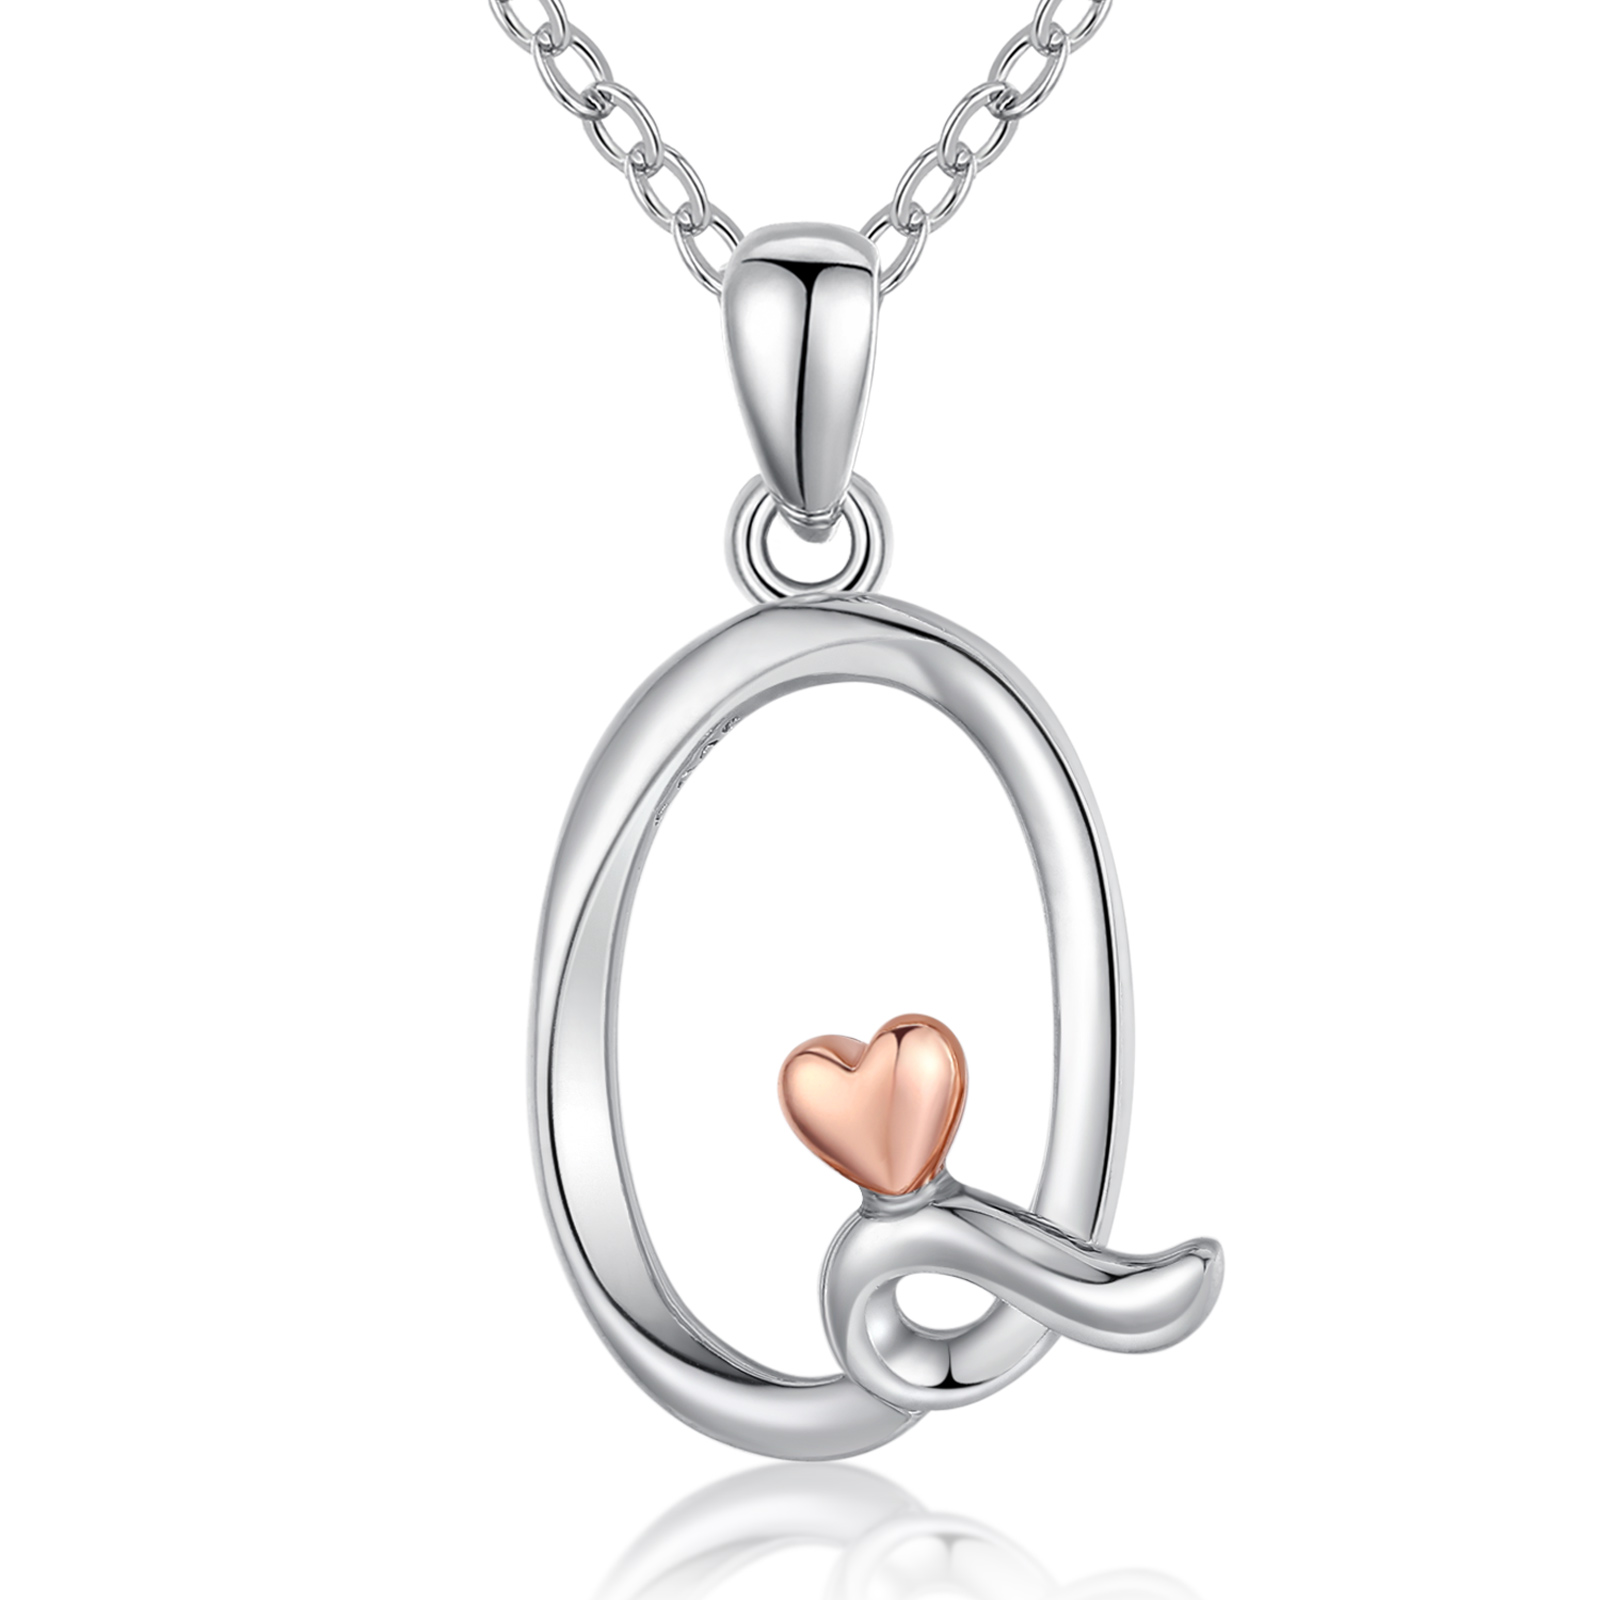 Merryshine Jewelry s925 sterling silver plated rhodium letter Q initial necklace for women with little heart